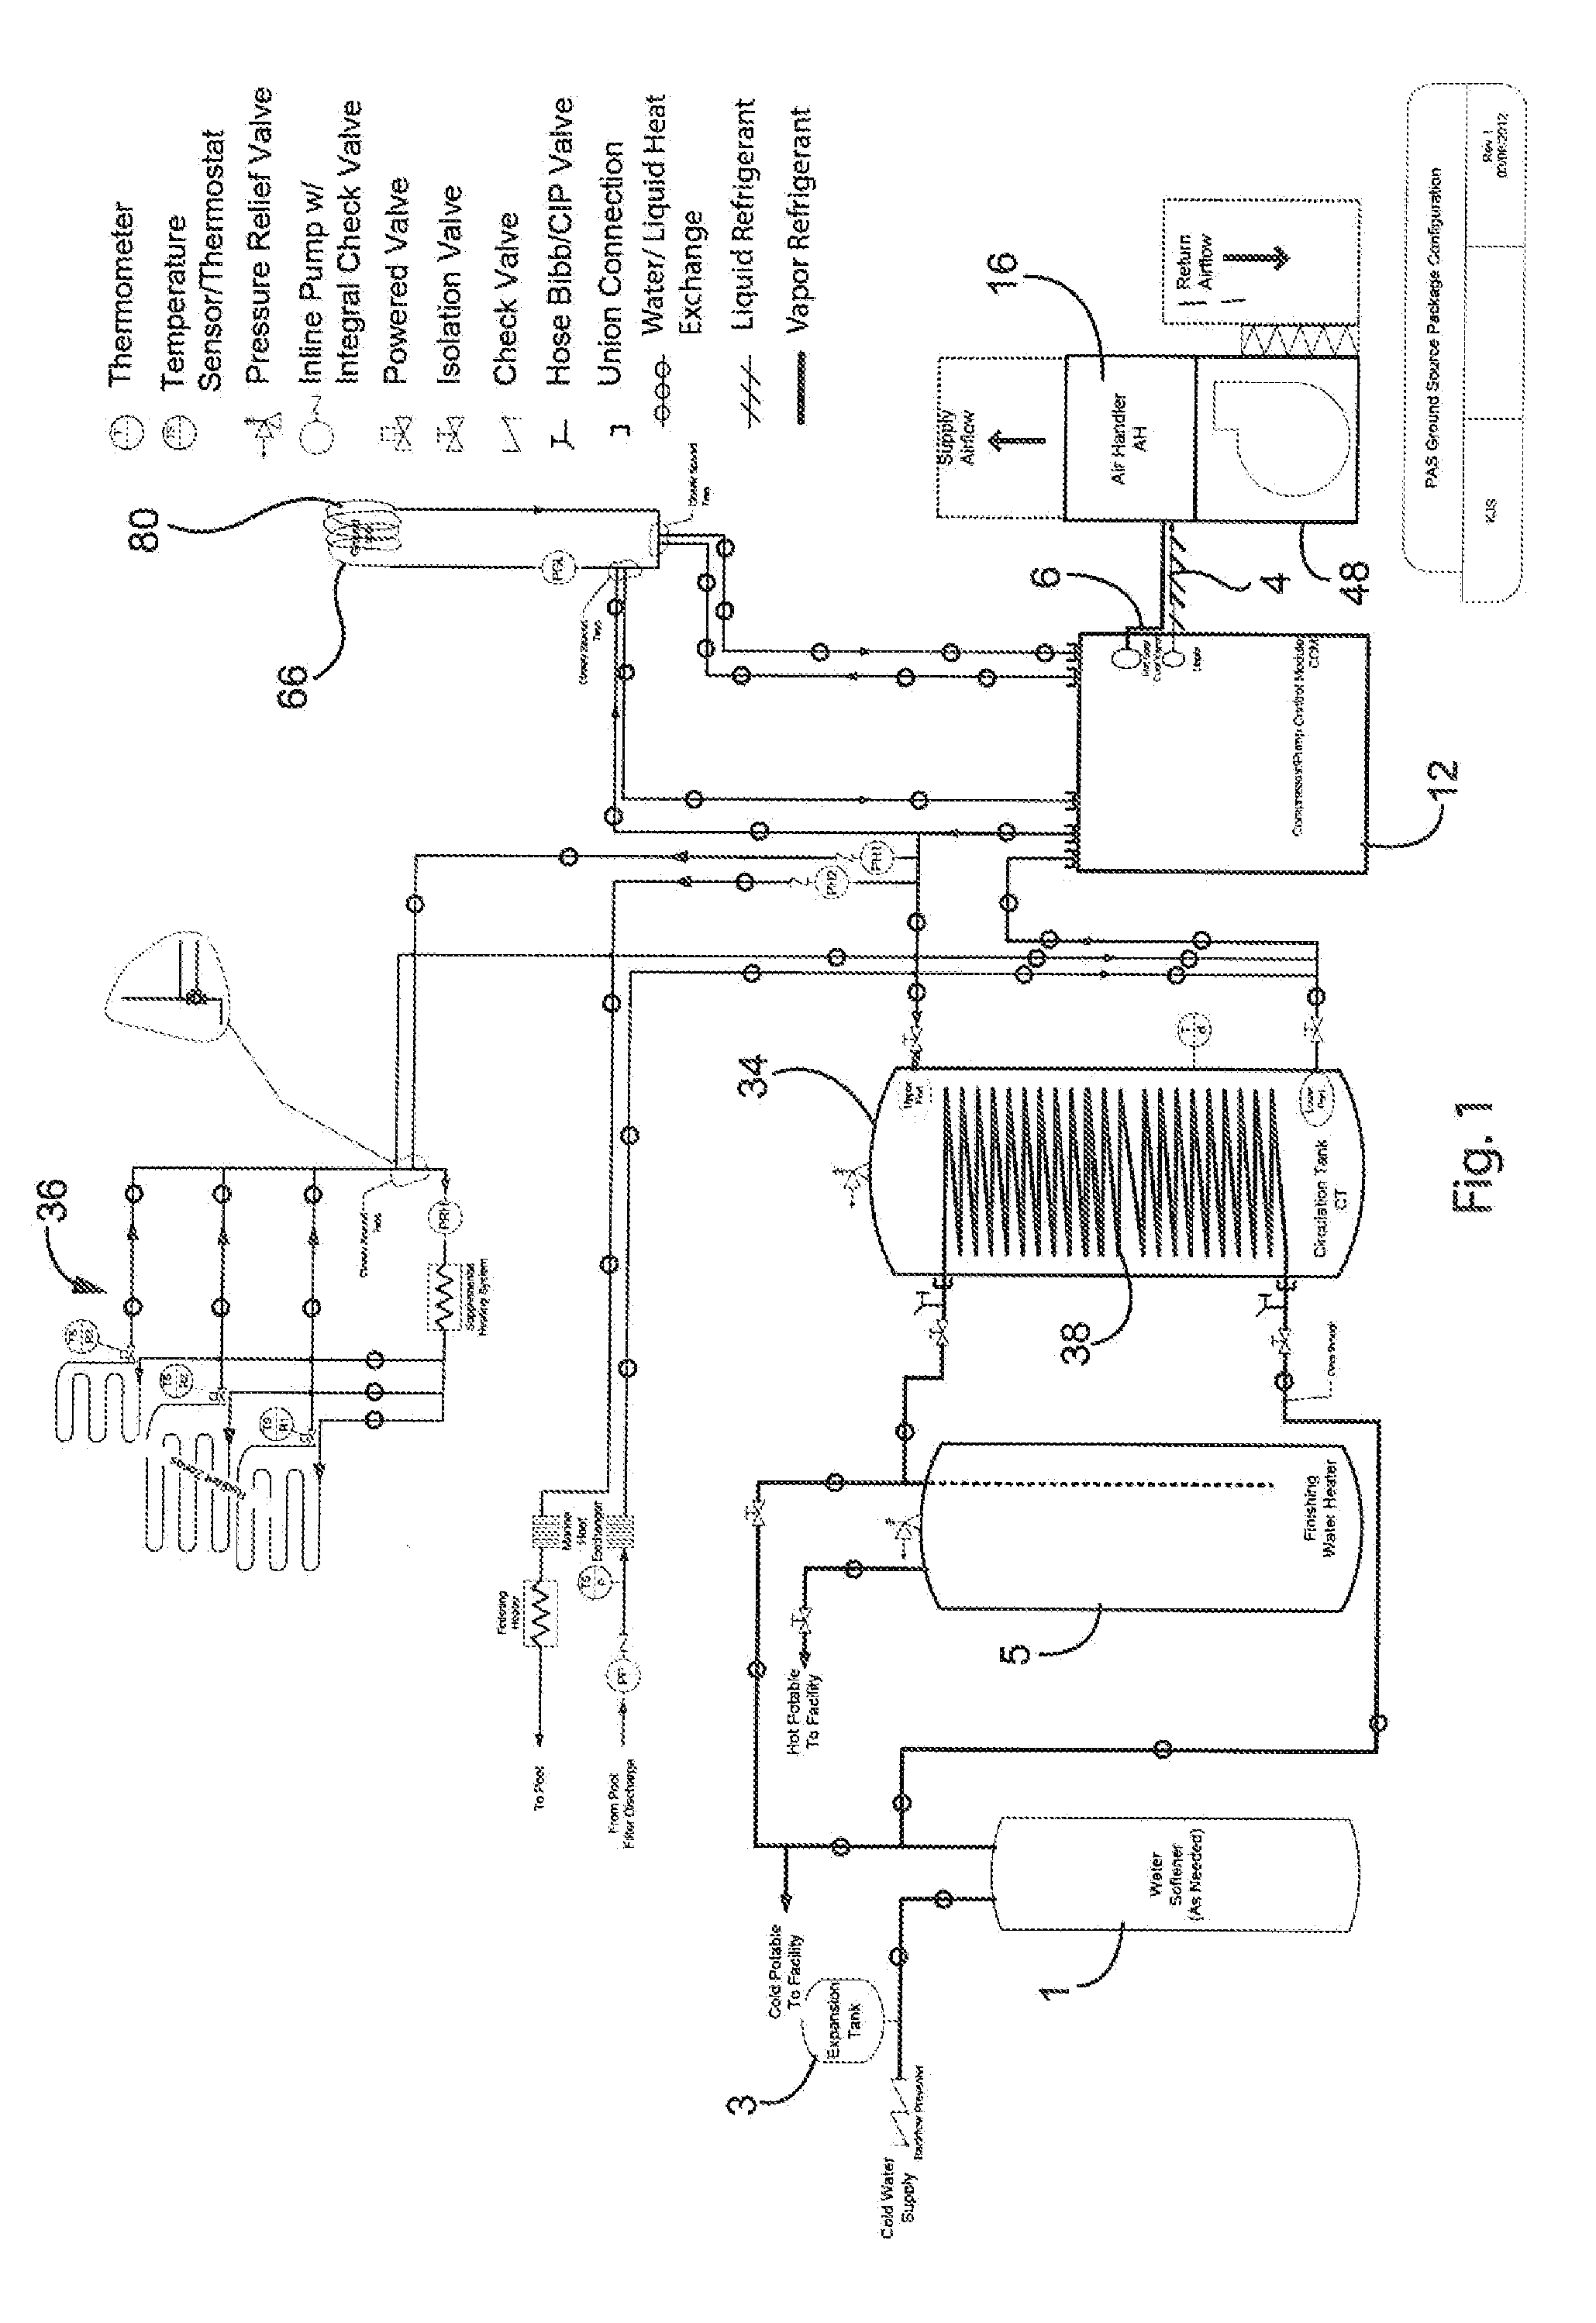 Multi-split Heat Pump for Heating, Cooling, and Water Heating